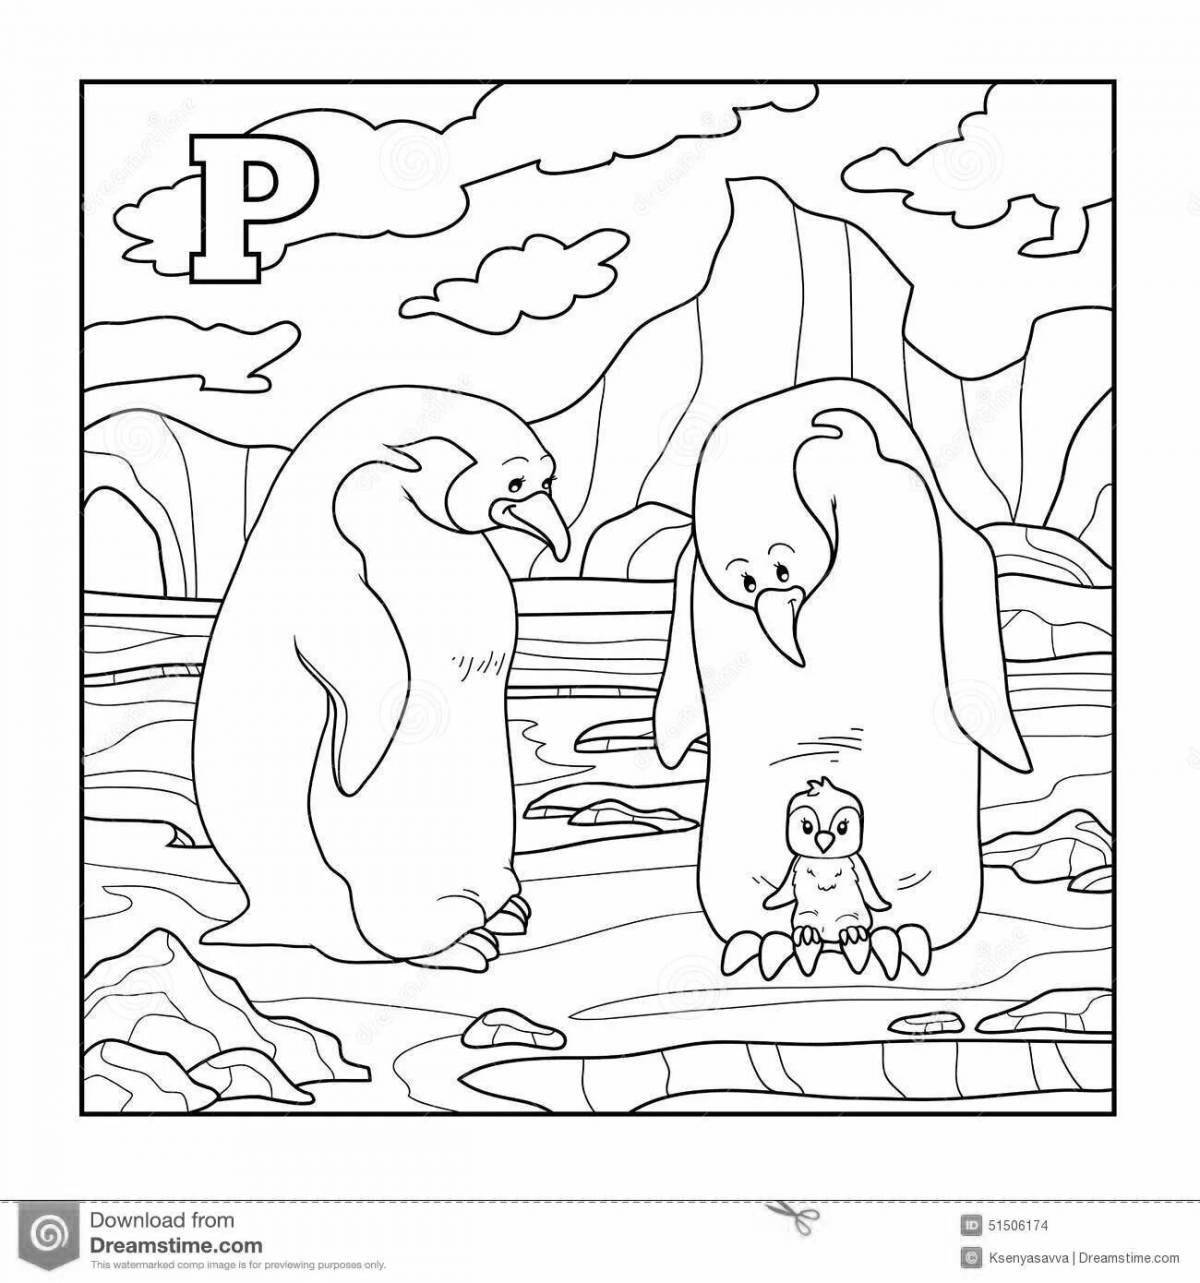 Shining antarctica coloring book for children 6-7 years old